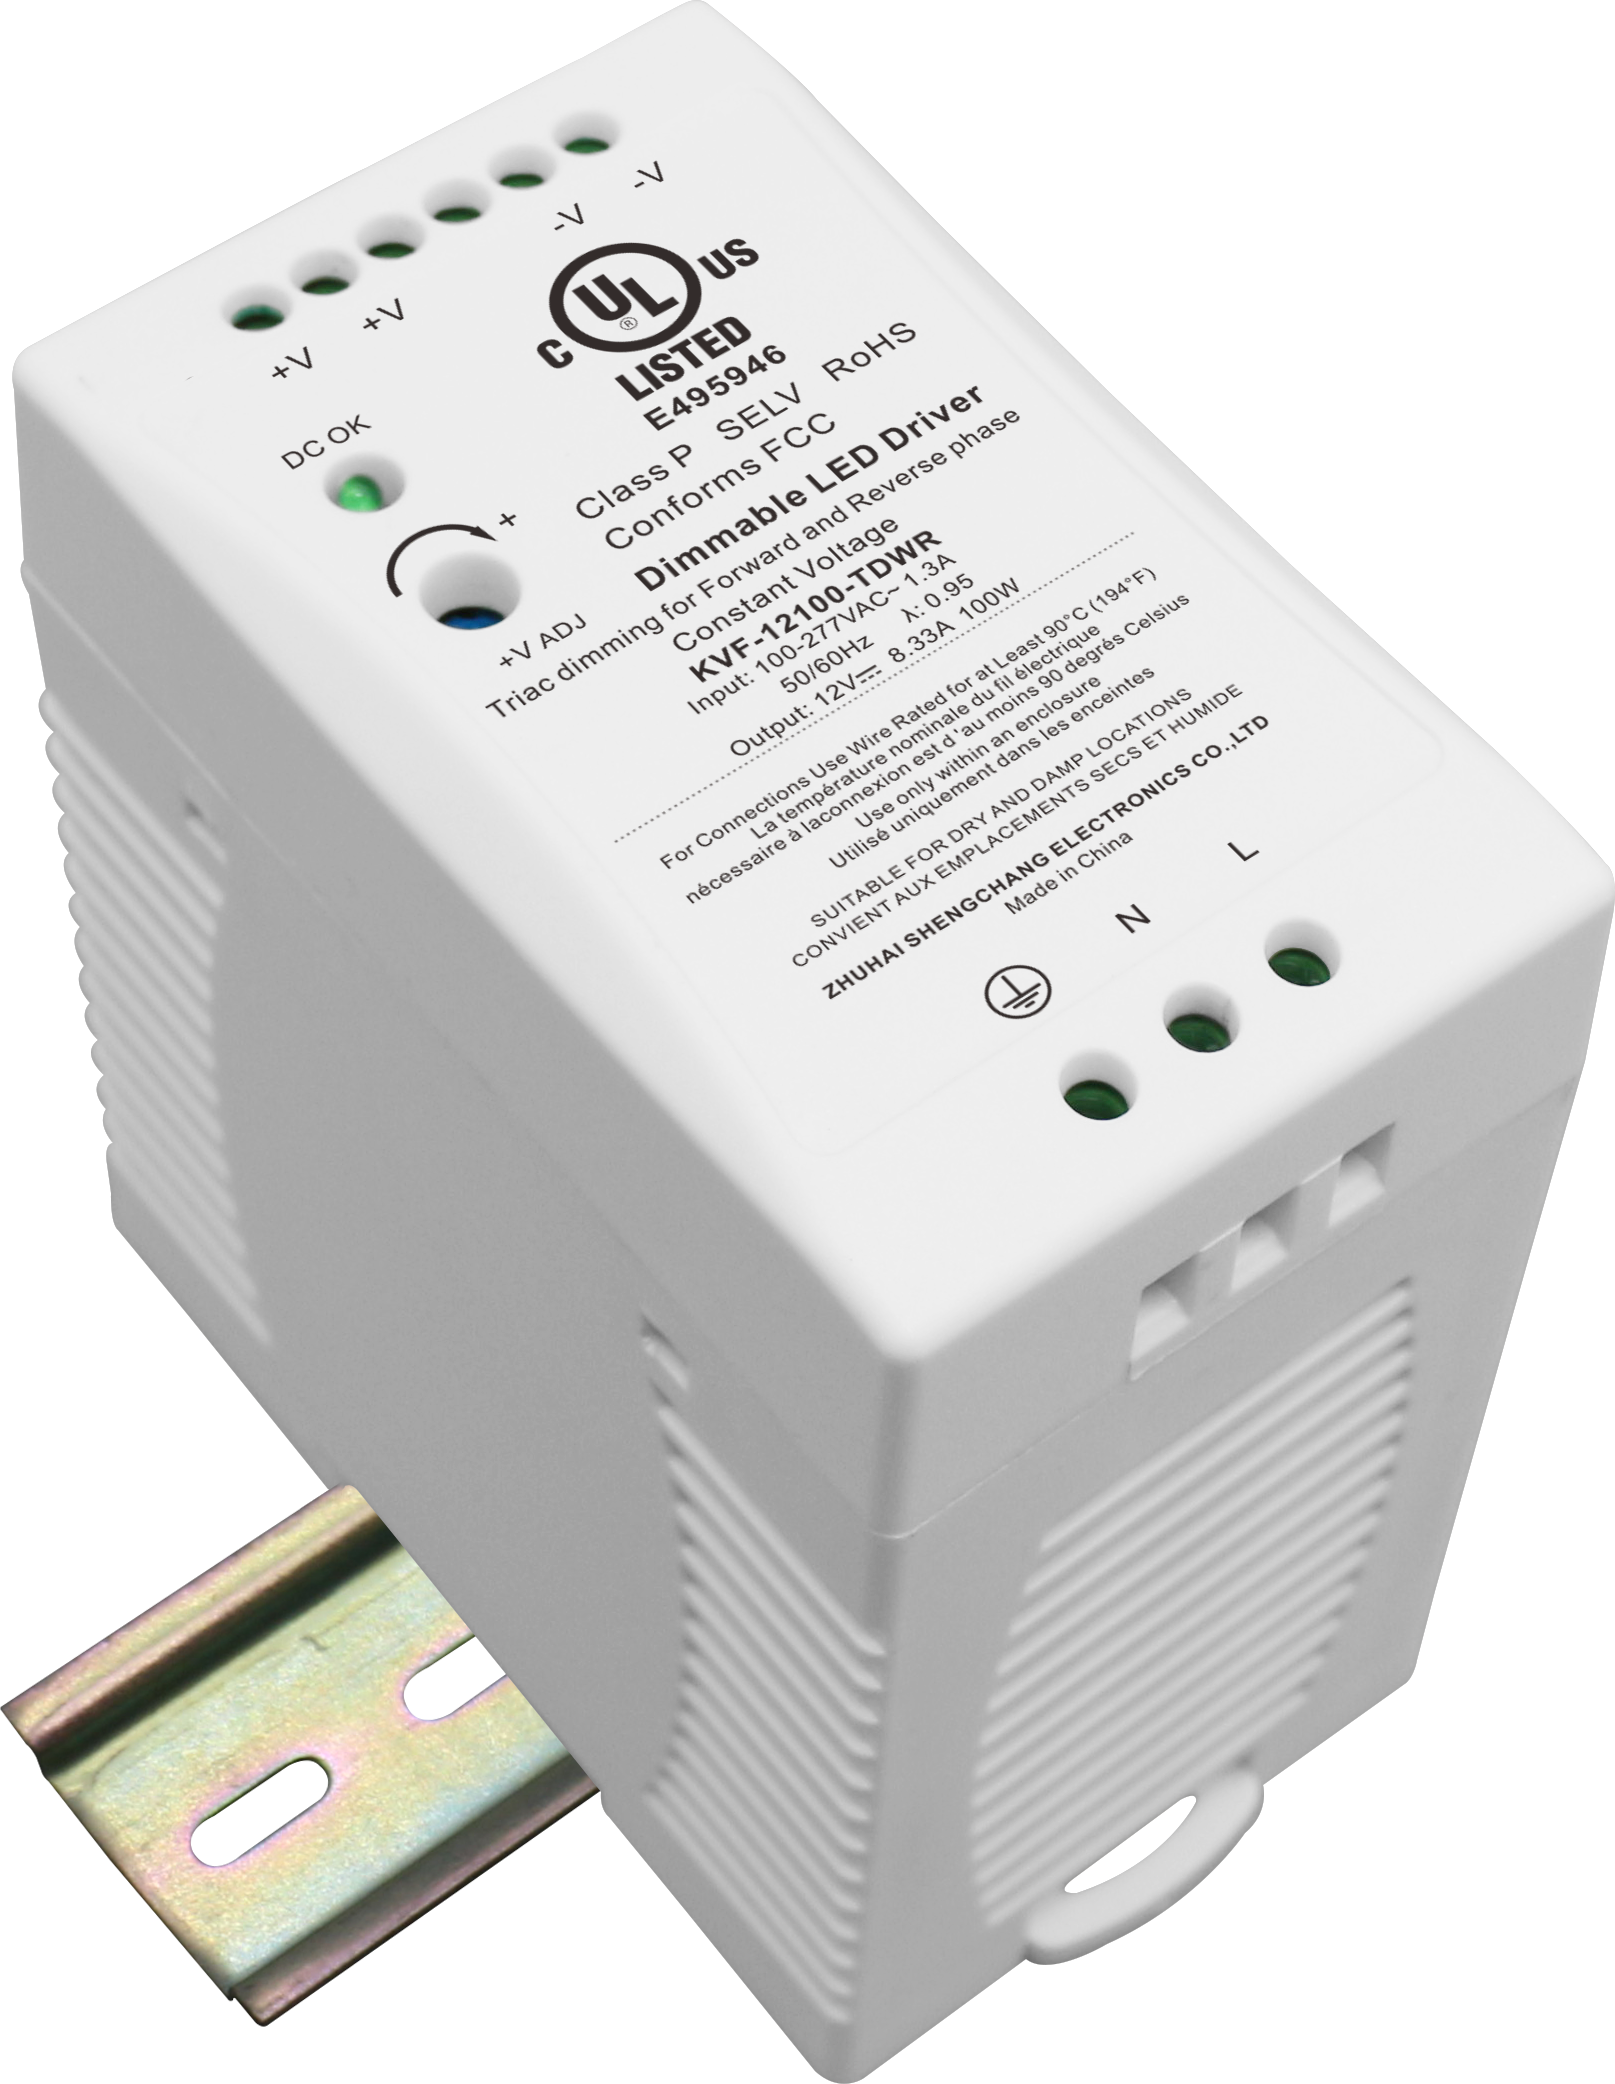 KVF-TDWR Series 100W Constant Voltage Triac Dimmable LED driver